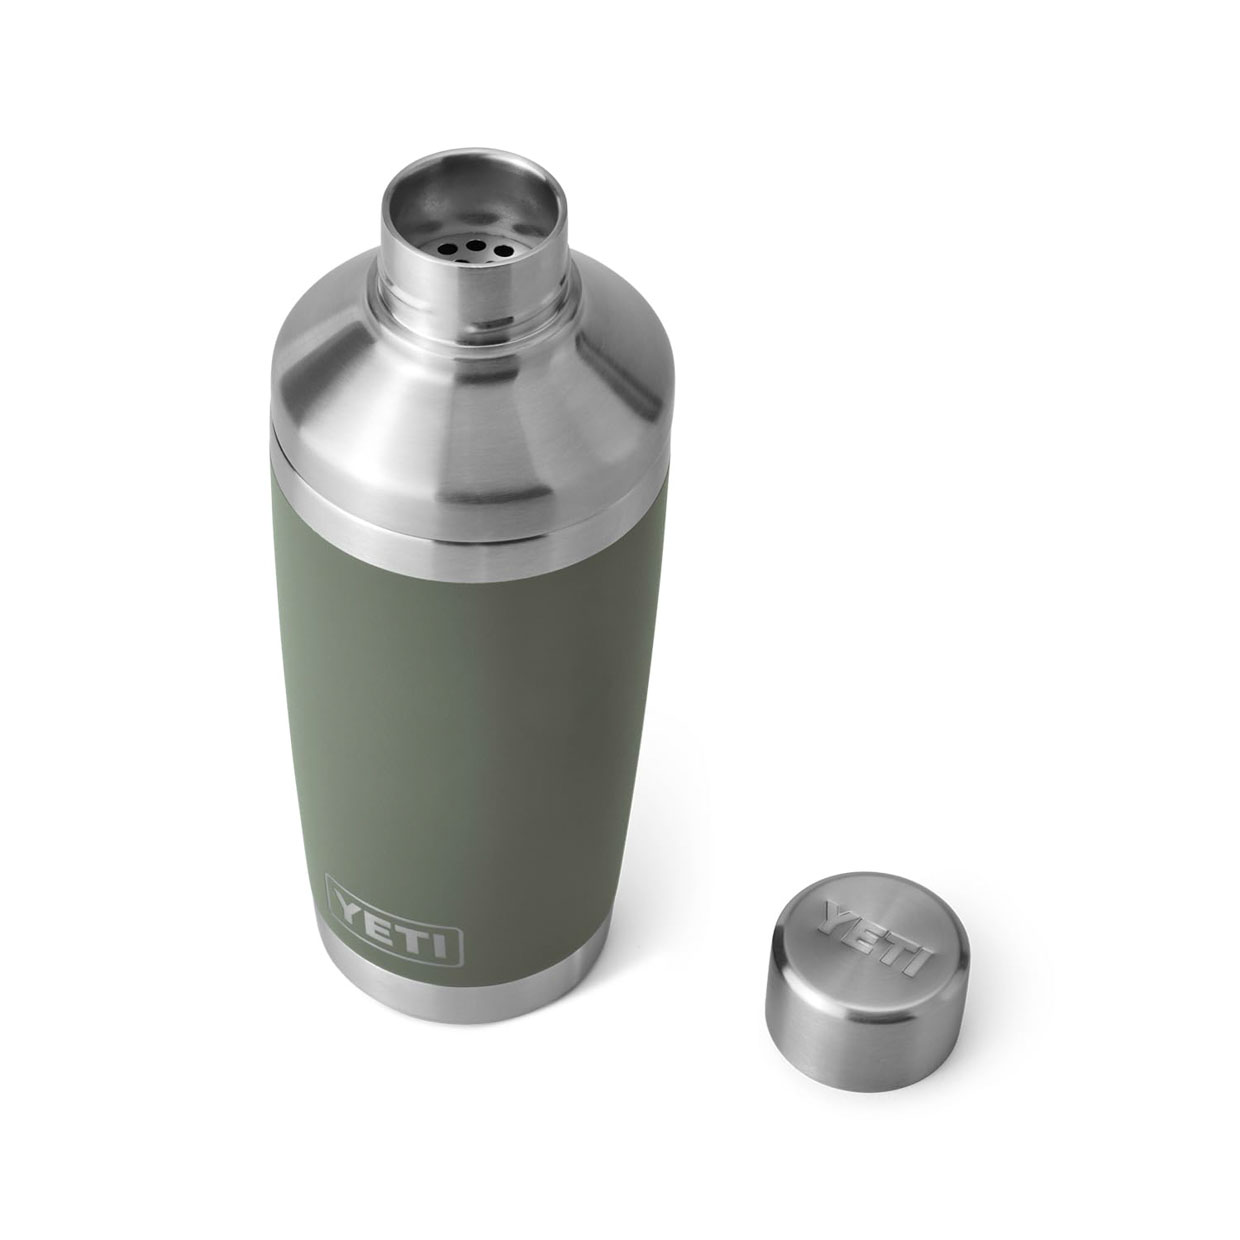 Enjoy Campsite Mixed Drinks with This Yeti Cocktail Shaker